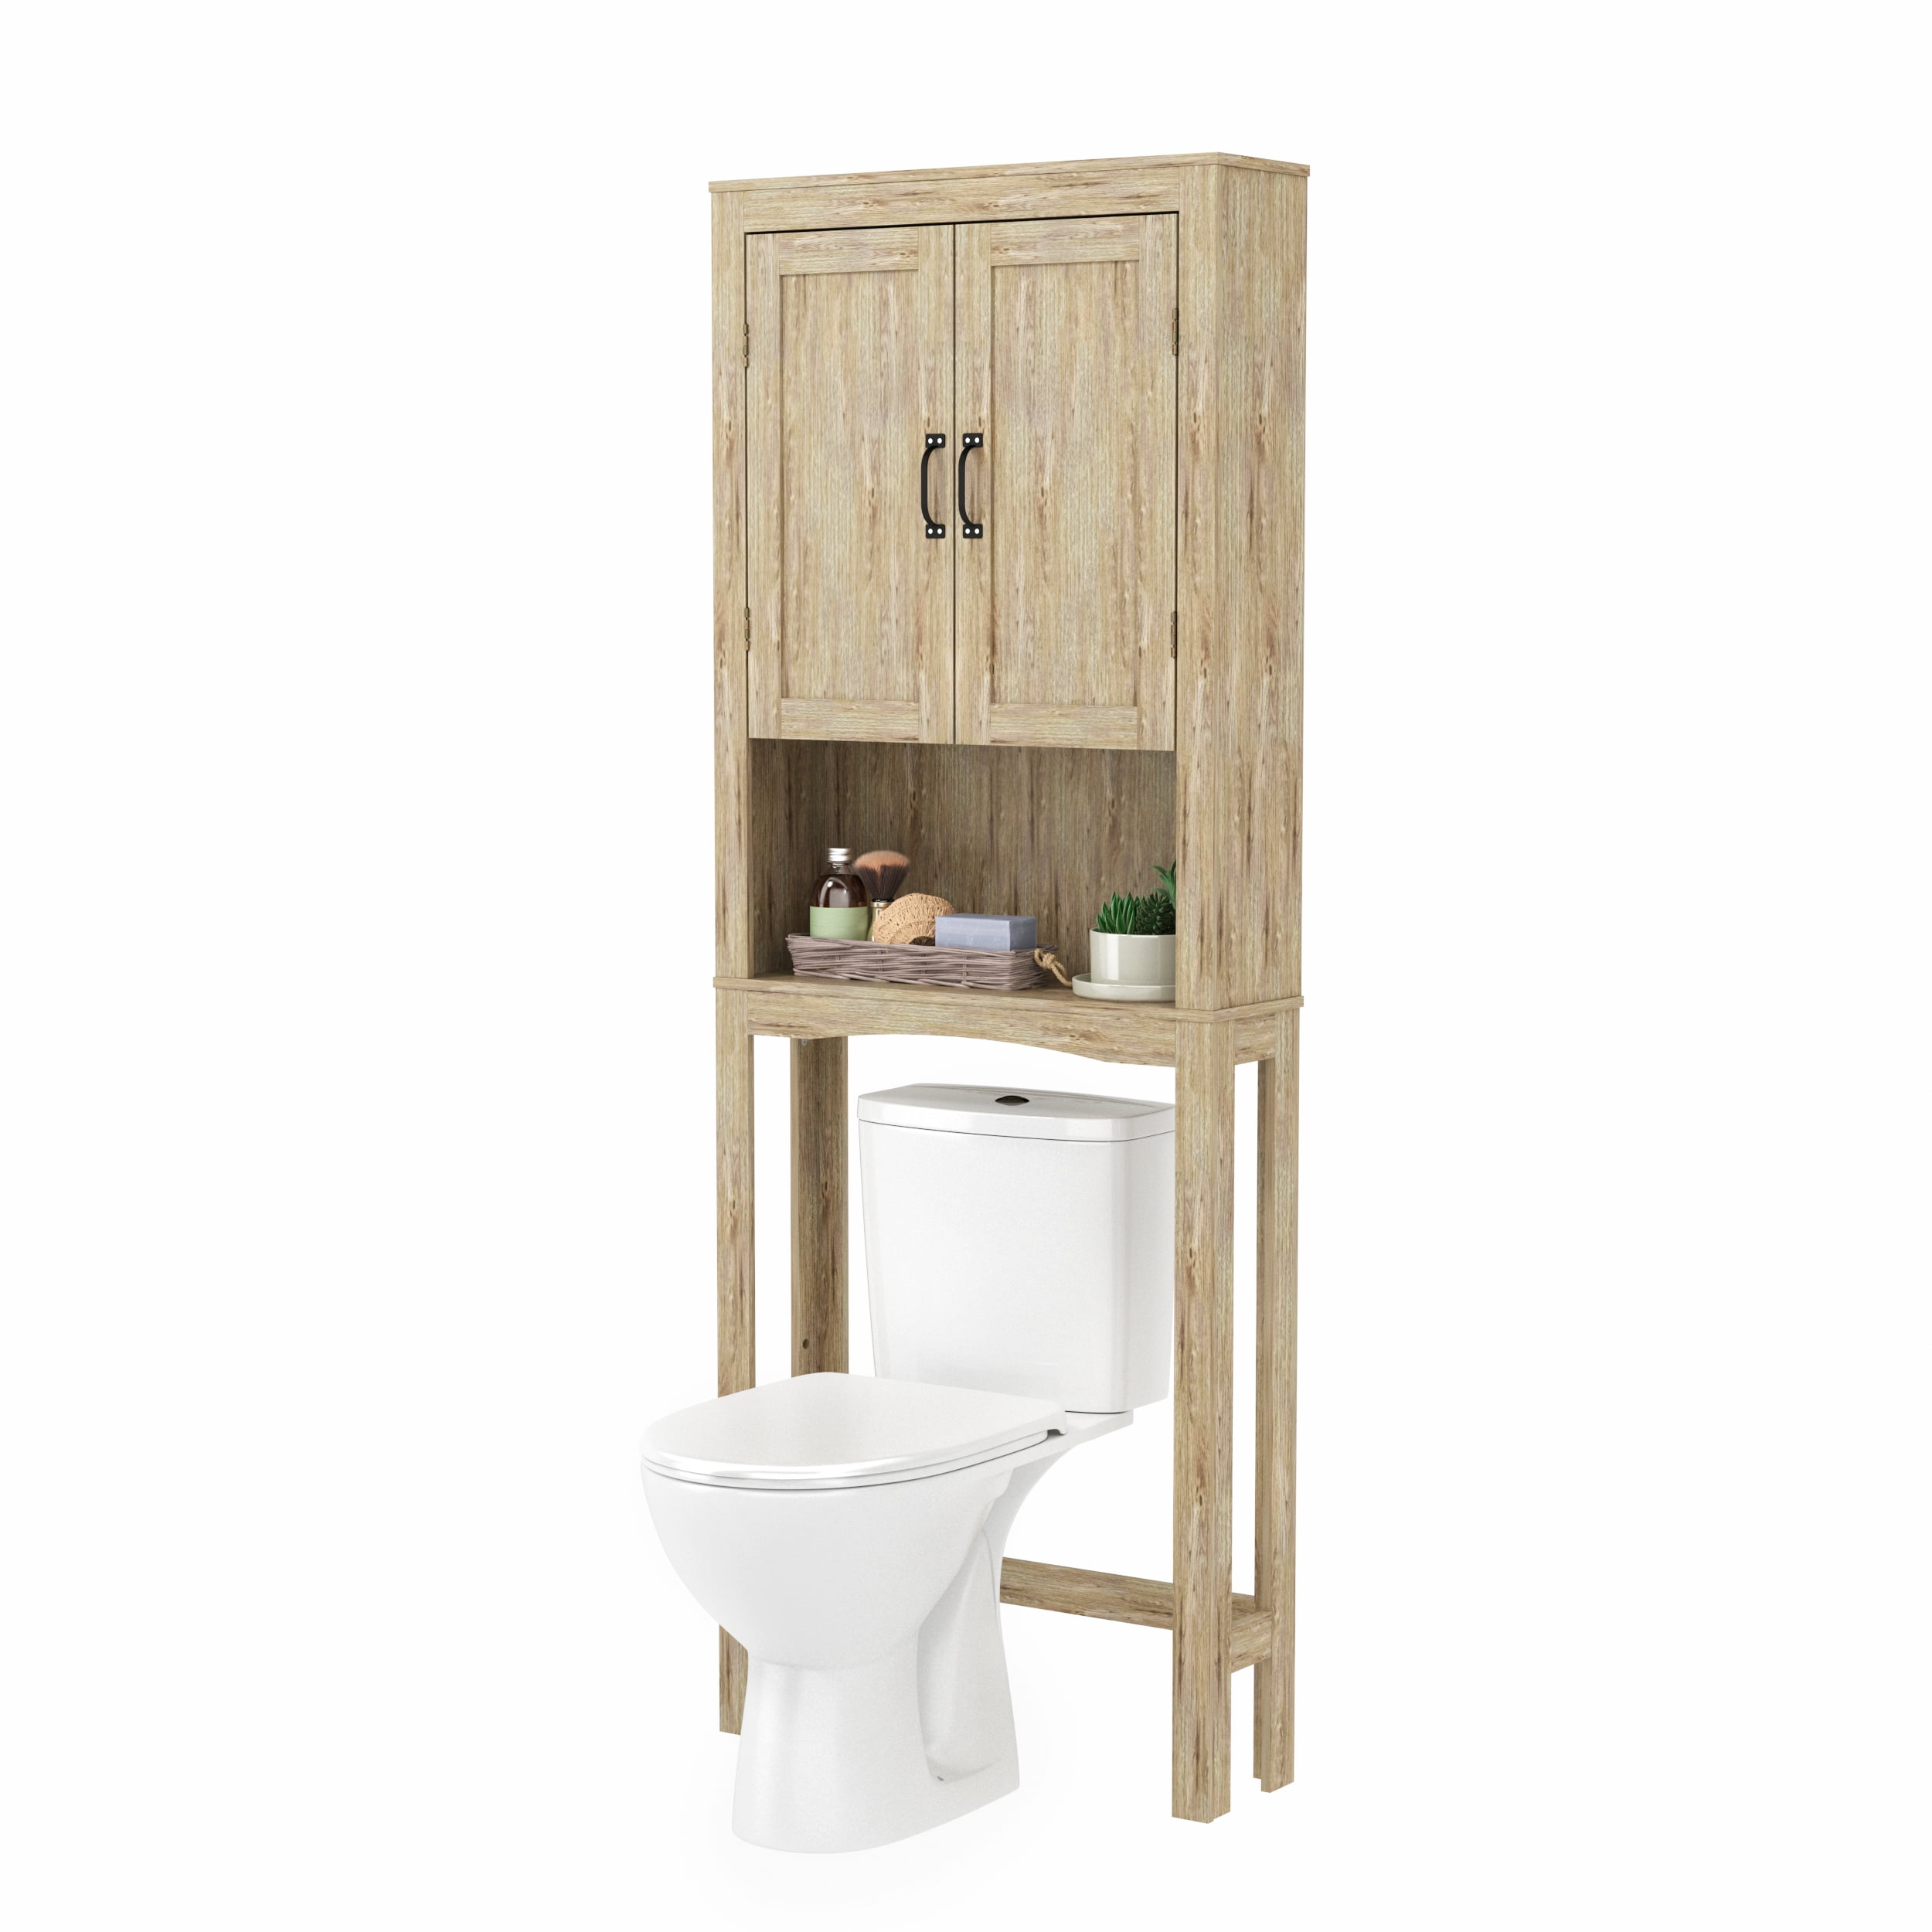 Lxing Over The Toilet Bathroom, Solid Wood Free Standing Over The Toilet Storage Cabinet